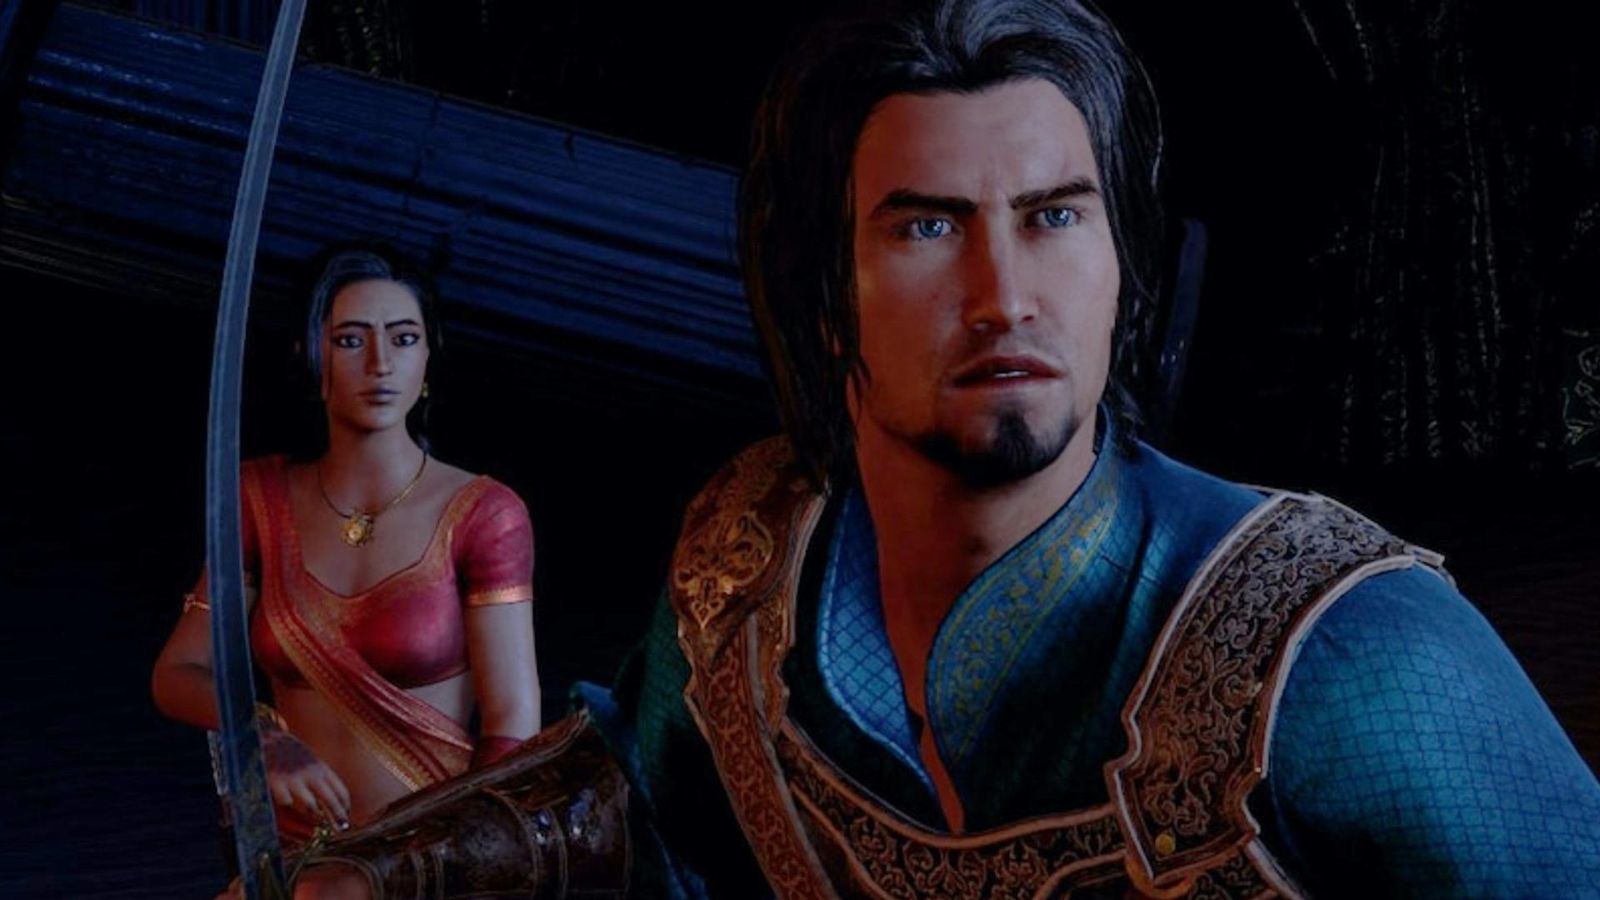 The Prince and Farah are standing next to each other in Prince of Persia: Sands of Time